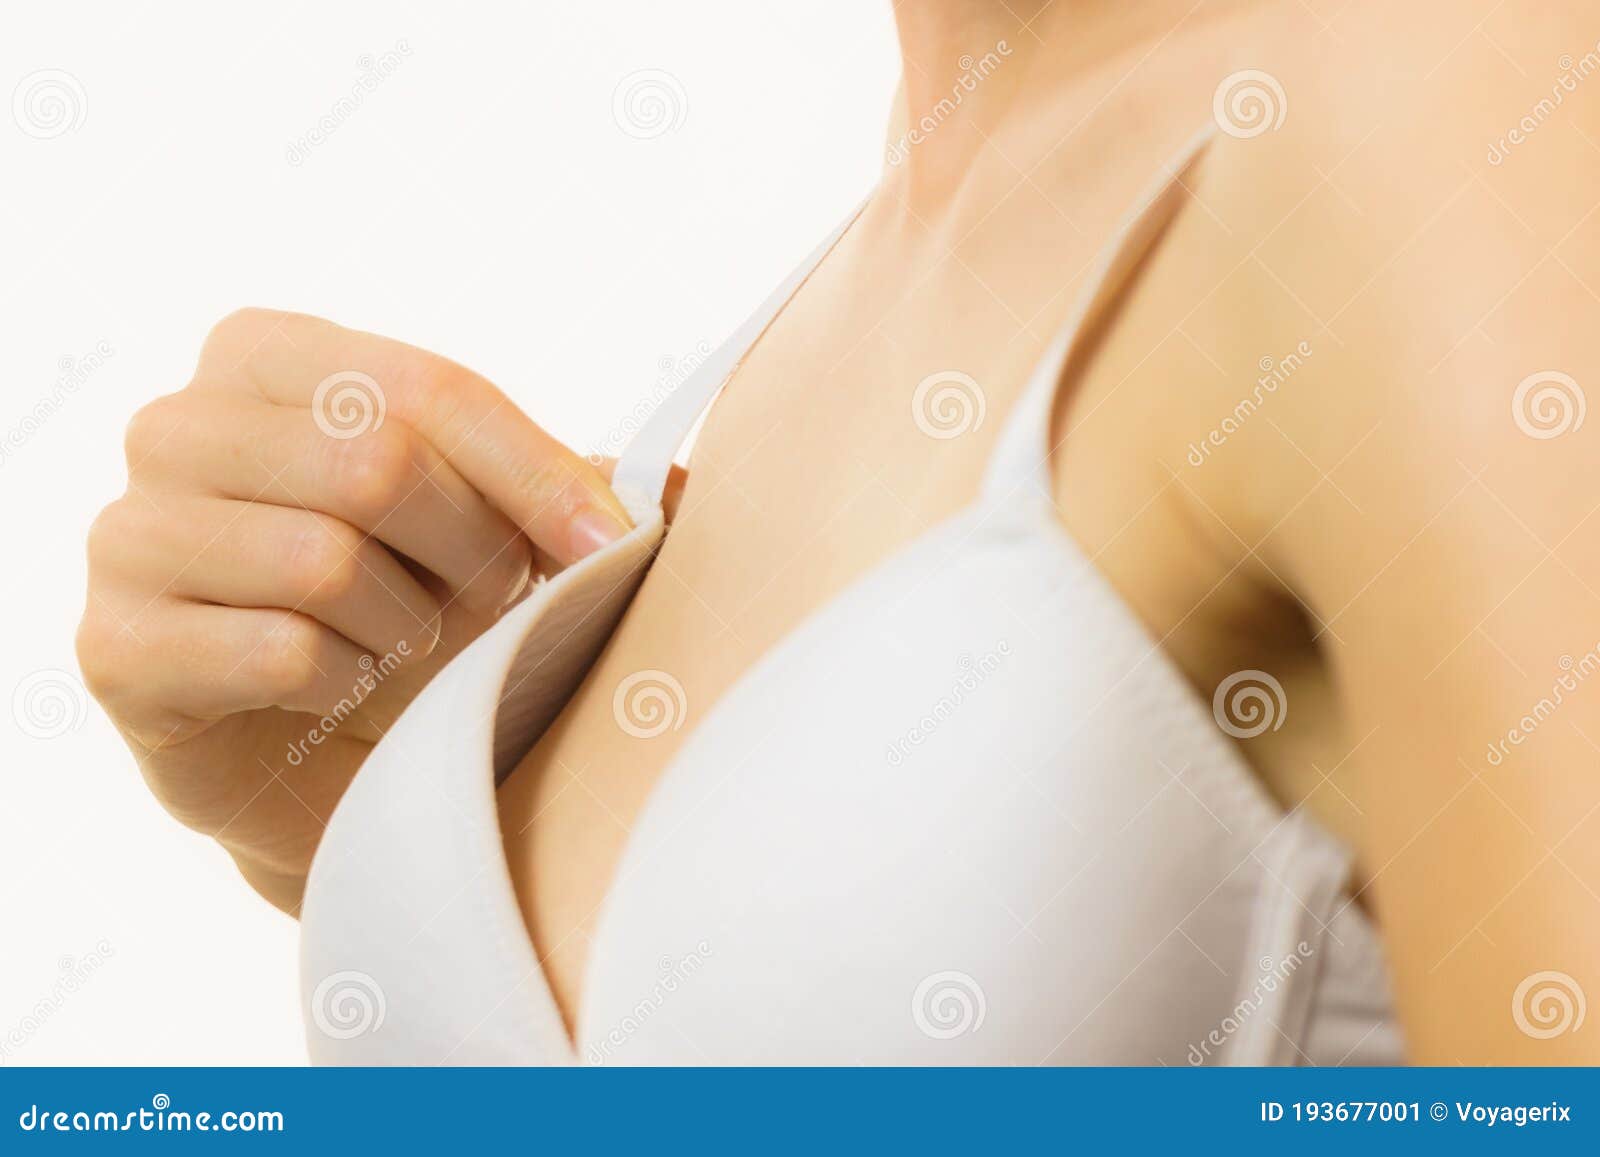 Young Woman Small Boobs Wearing Too Big Bra. Female Breast Wrong